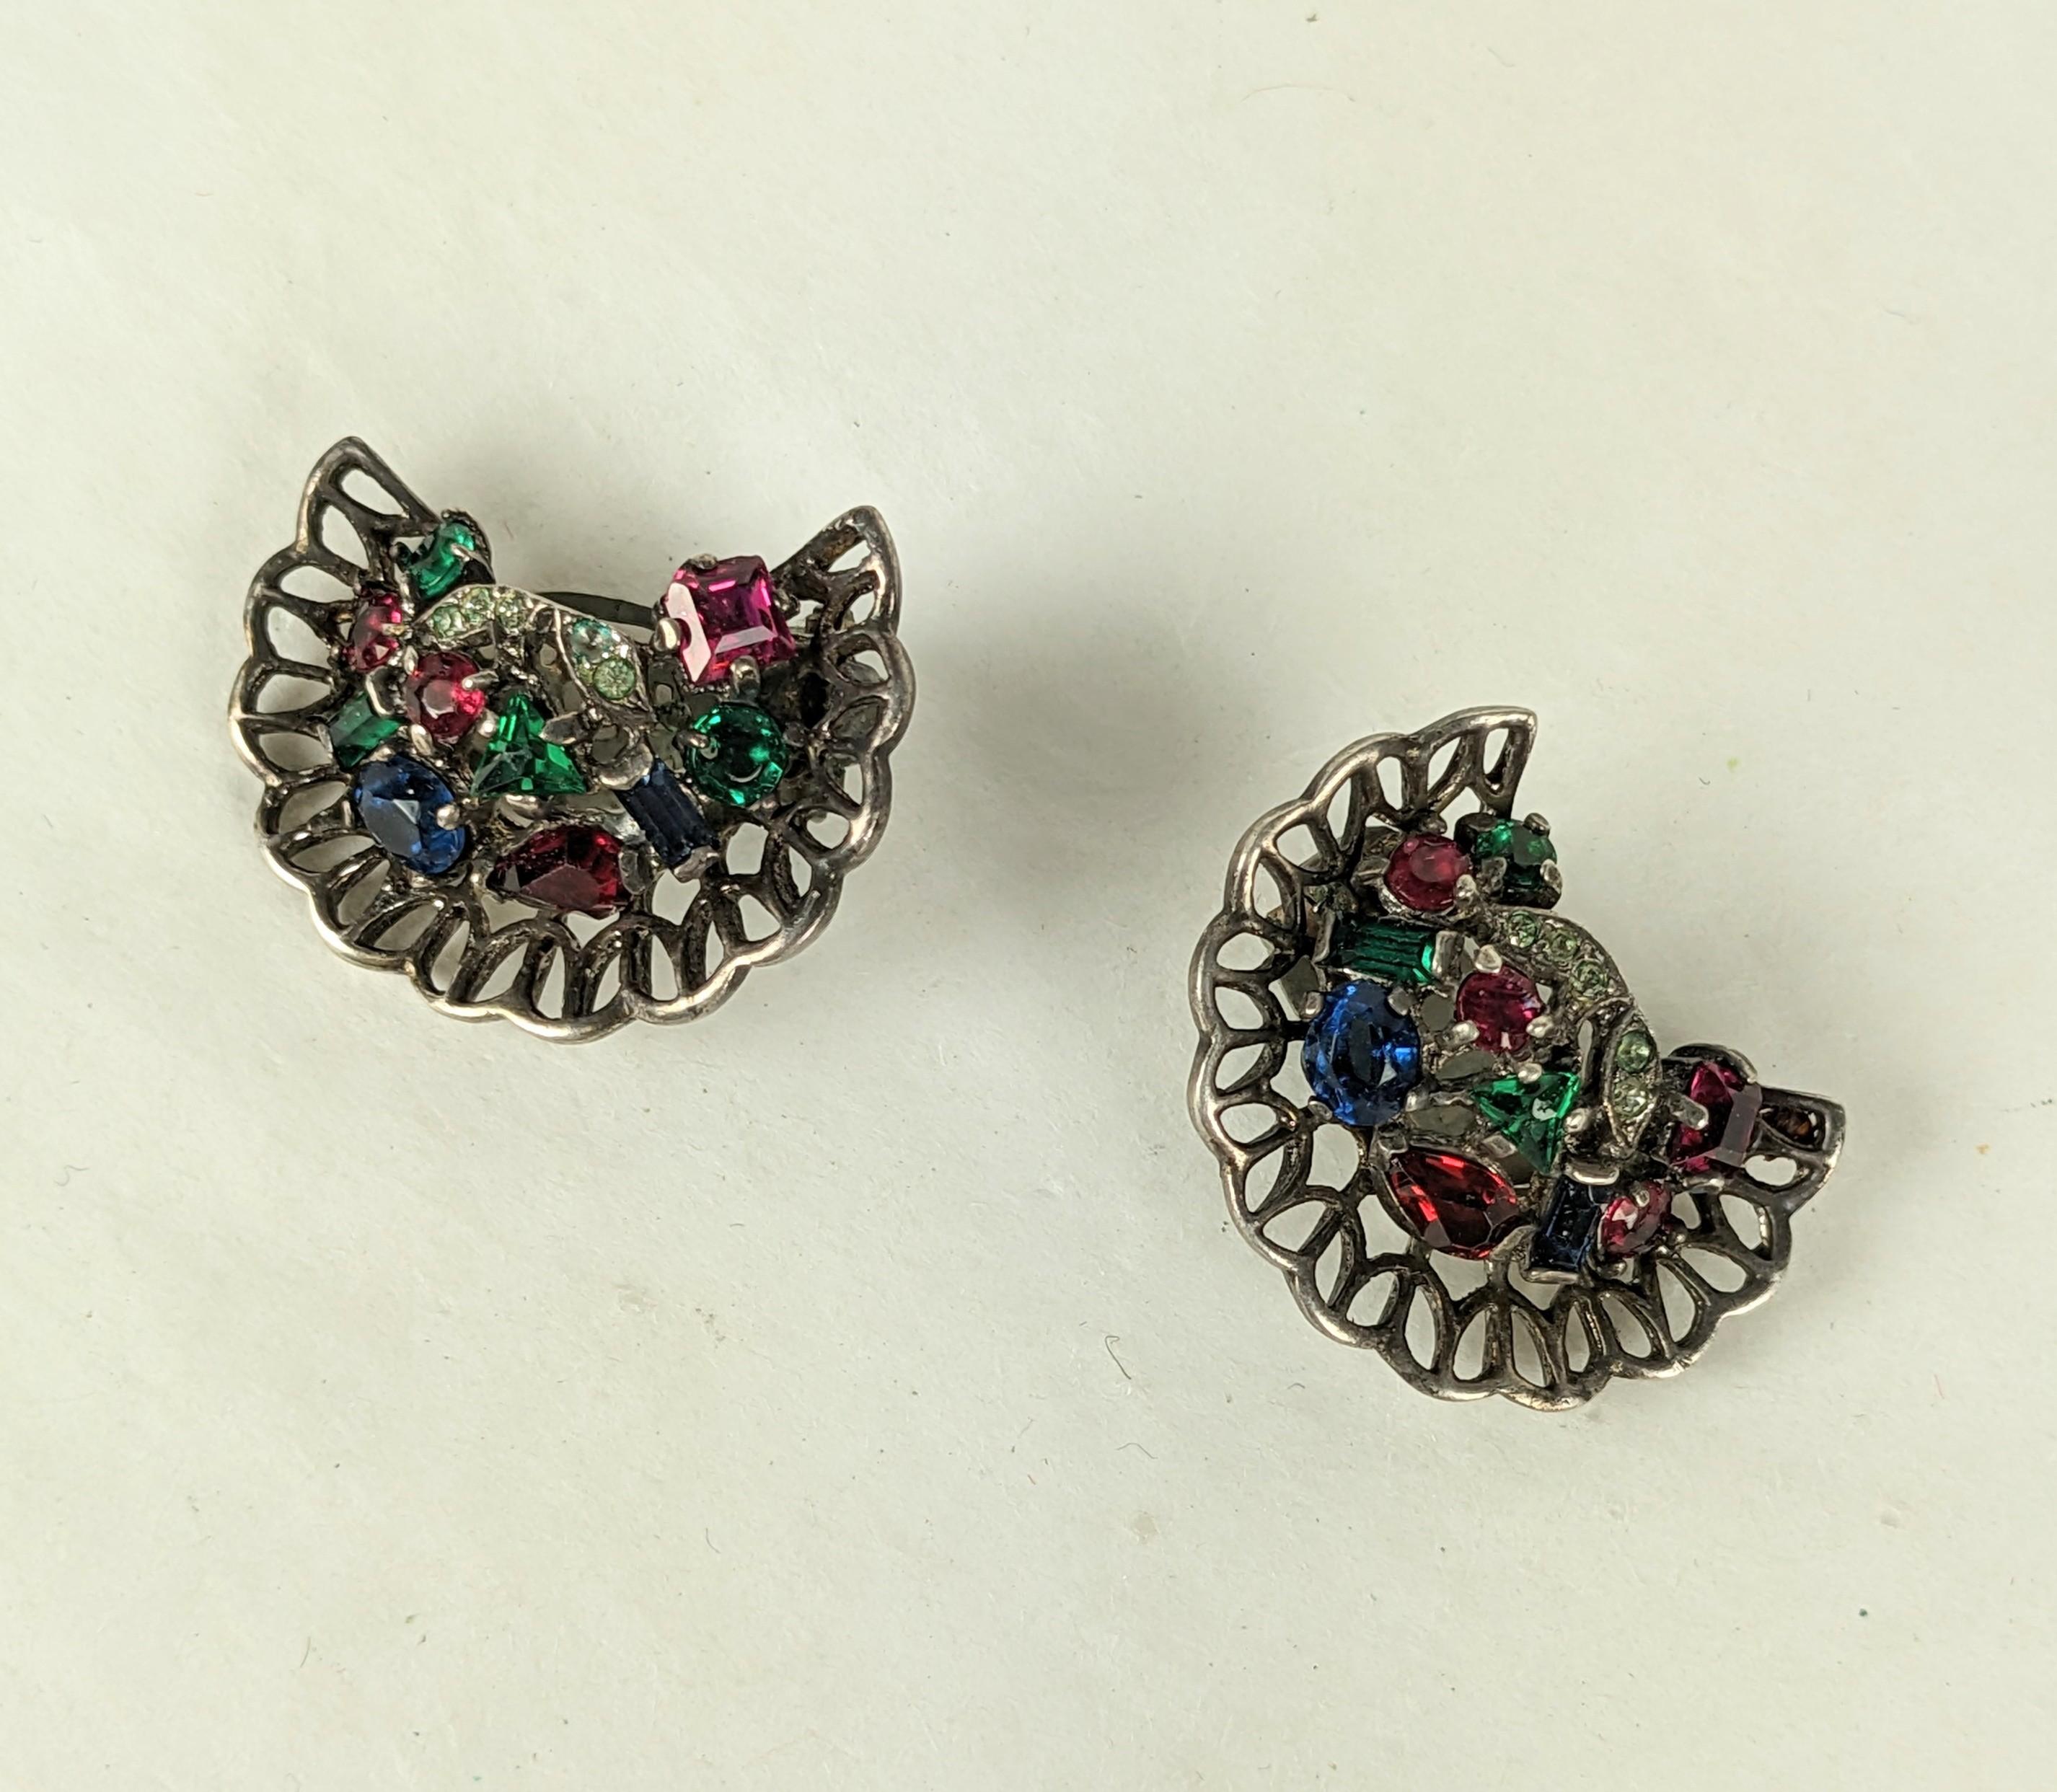 Trifari by Alfred Philippe Riviera Series gilded sterling silver open work earrings from the 1940's. Faux vari cut ruby, emerald, and sapphire gems are set in vermeil sterling silver.
Excellent condition. Clip back fittings.